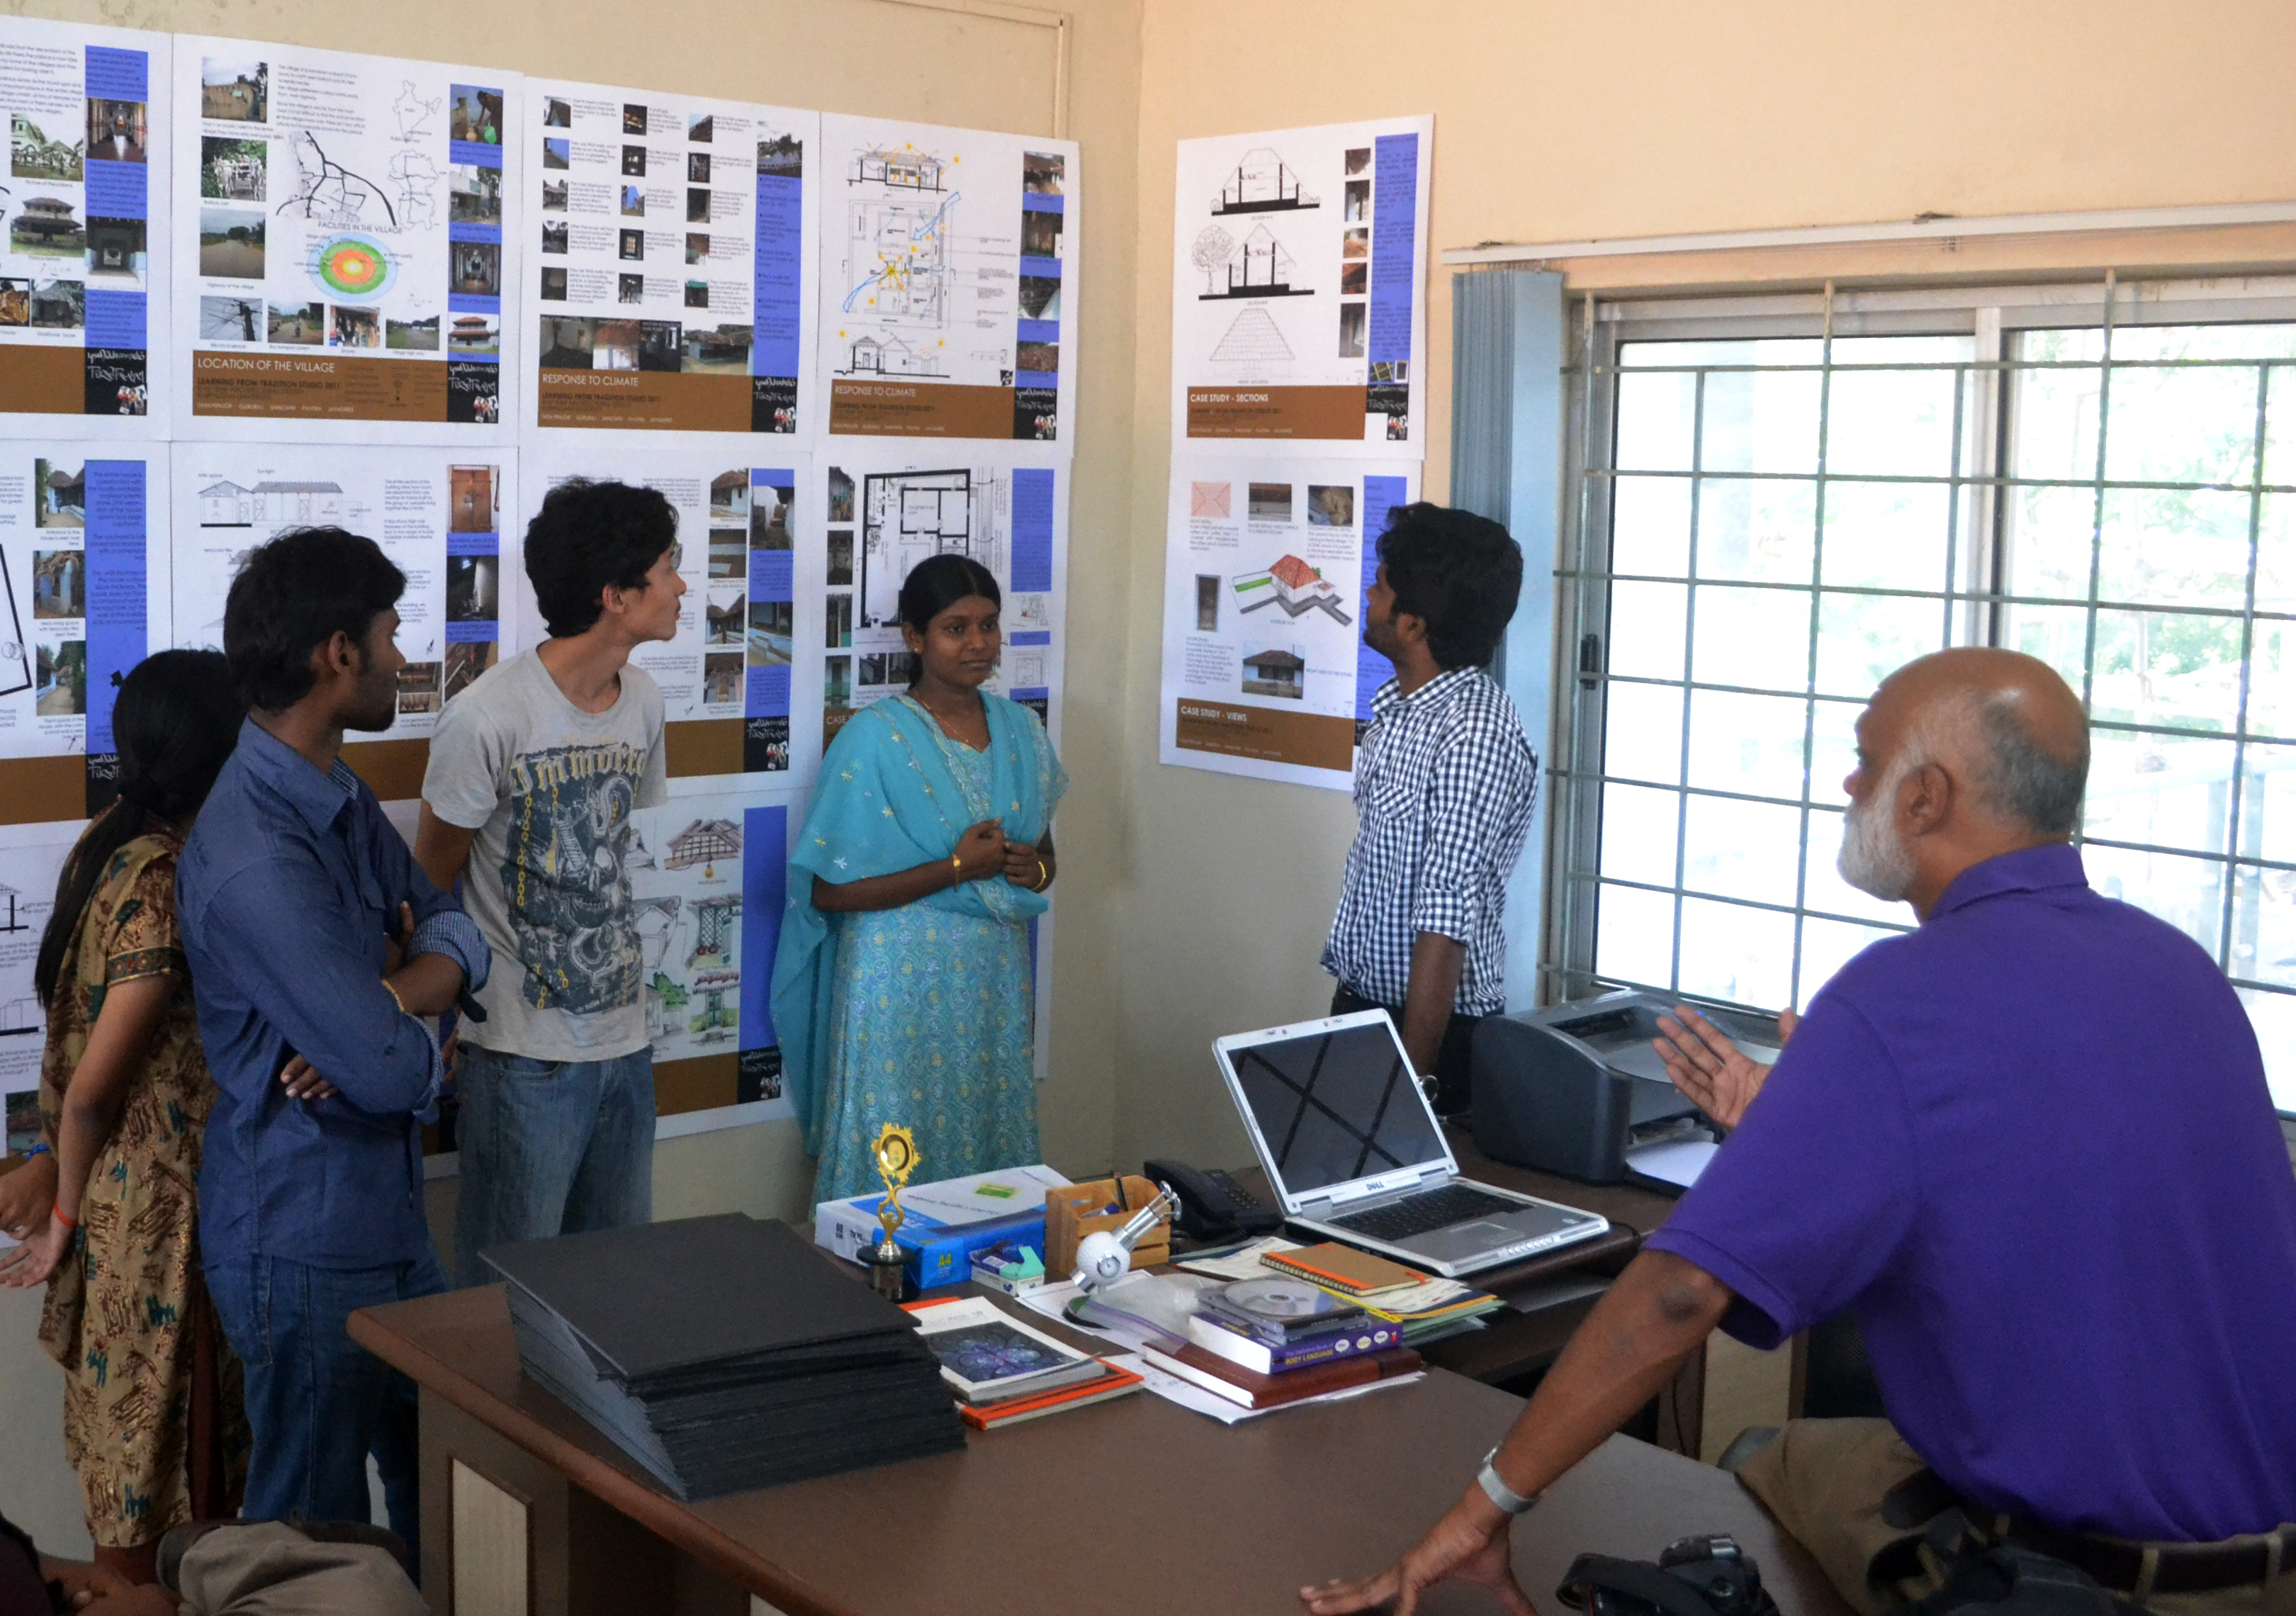 Aranha critiquing student work as a Fulbright Specialist in India 2011